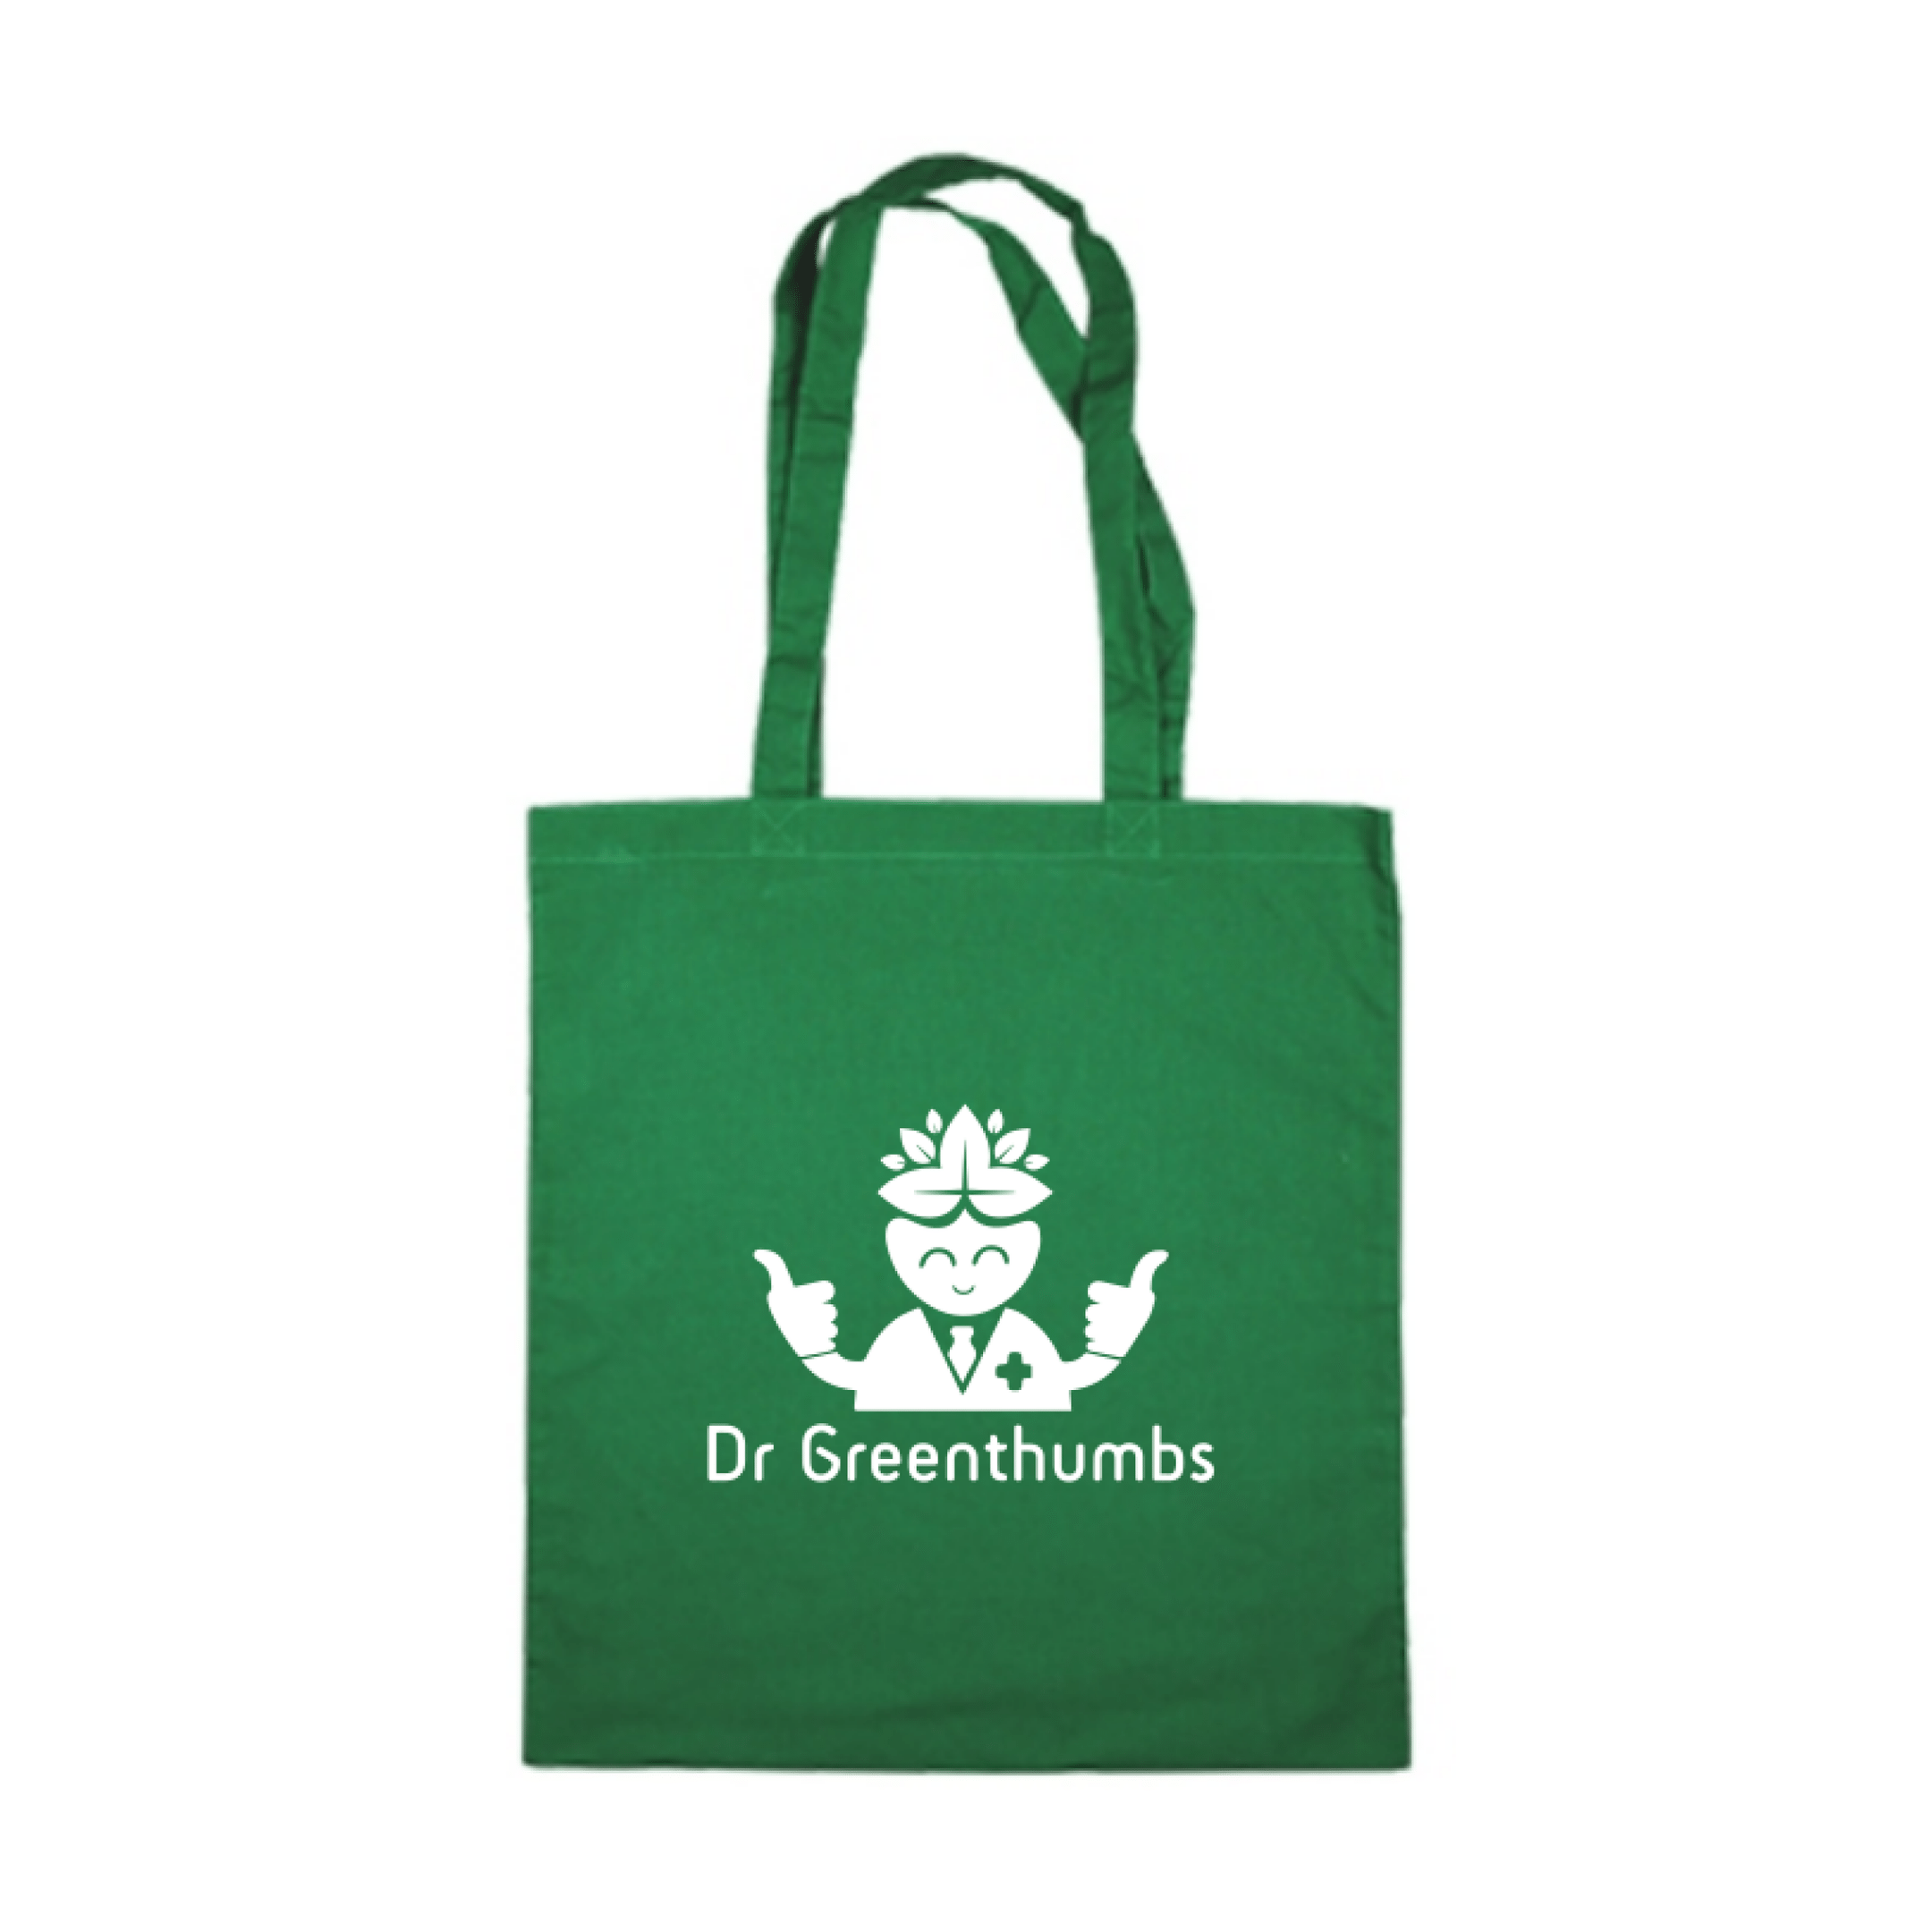 Dr Greenthumbs Dr Greenthumbs Show Bag w/ Samples